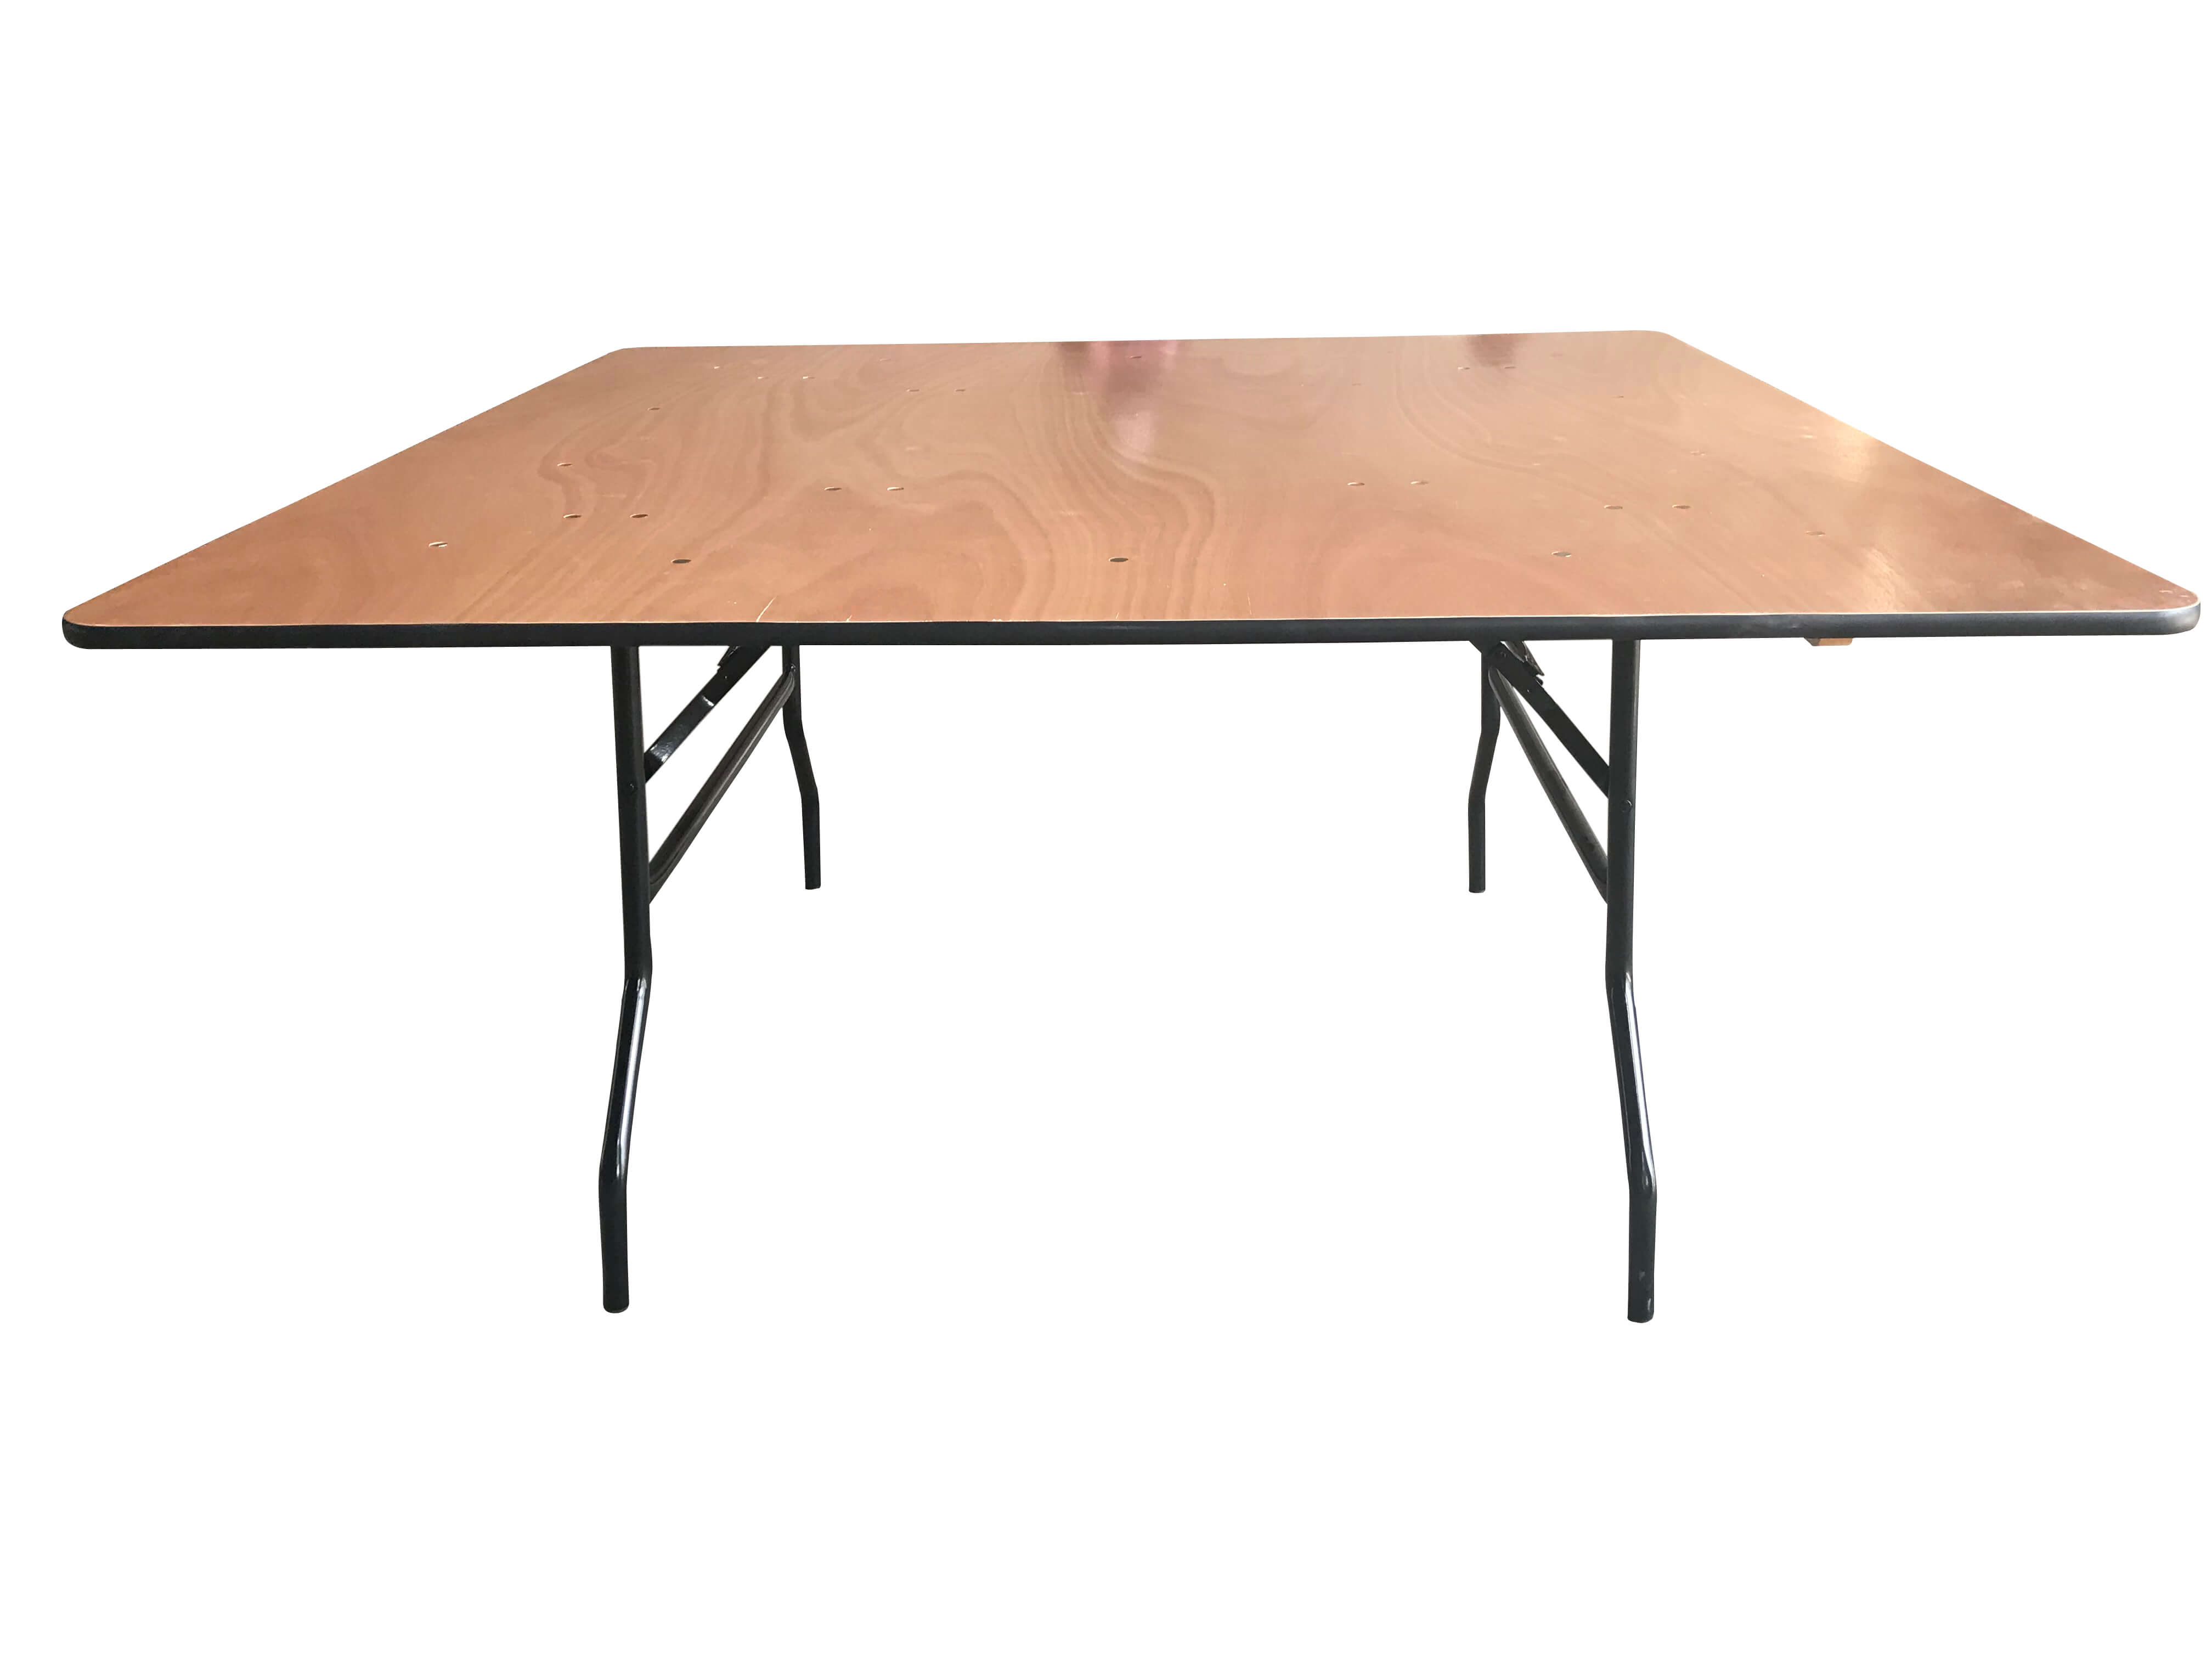 Wooden Square Folding Table 5 